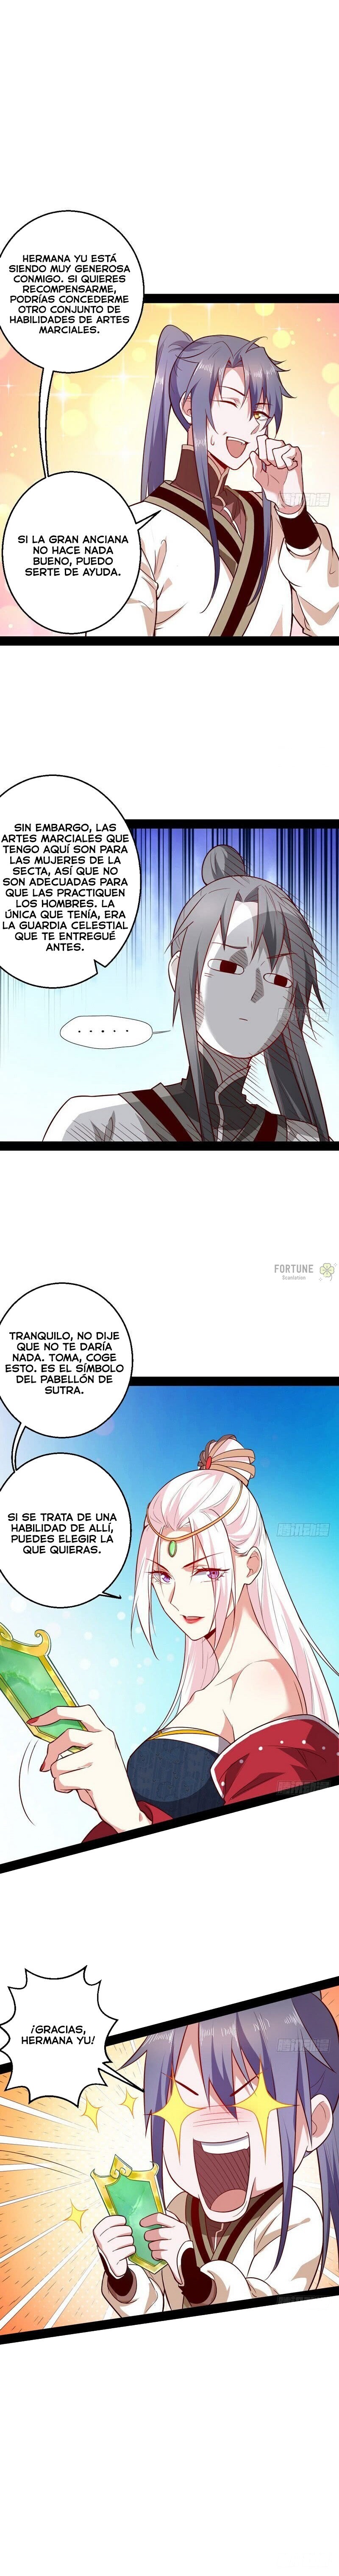 Manga Soy un dios maligno Chapter 16 image number 13